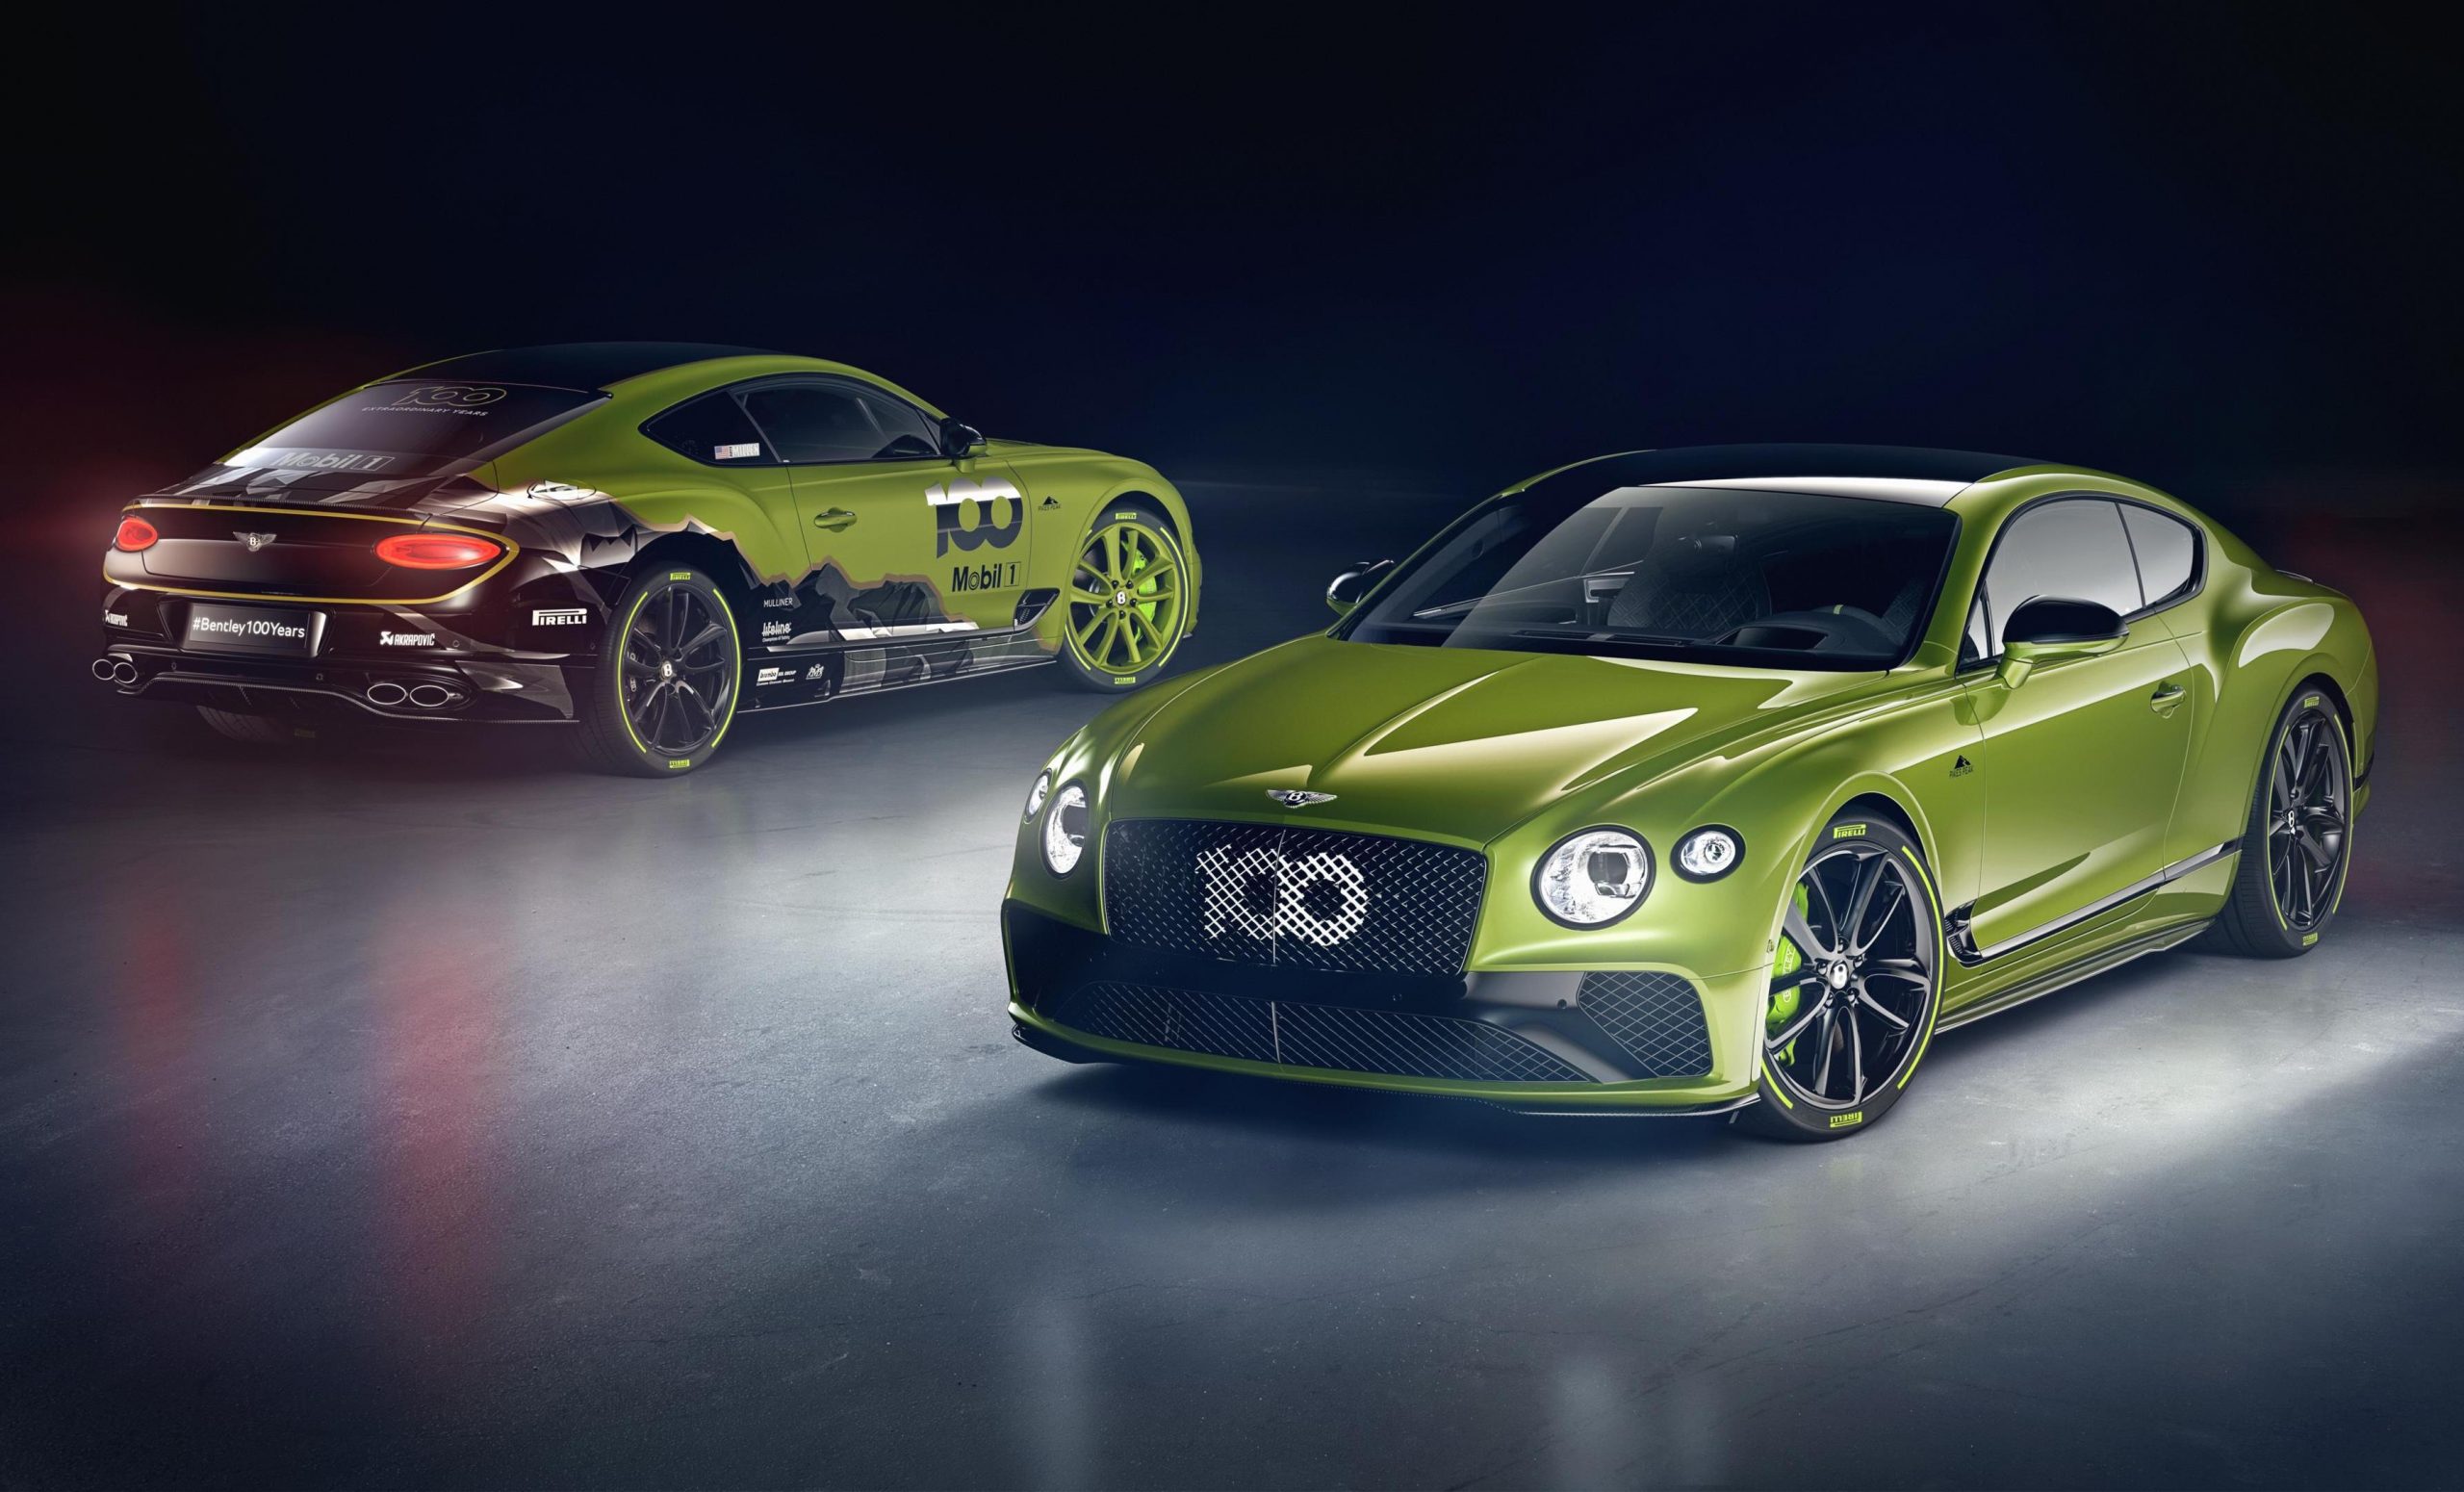 Bentley Continental GT Limited Edition celebrates Pikes Peak record